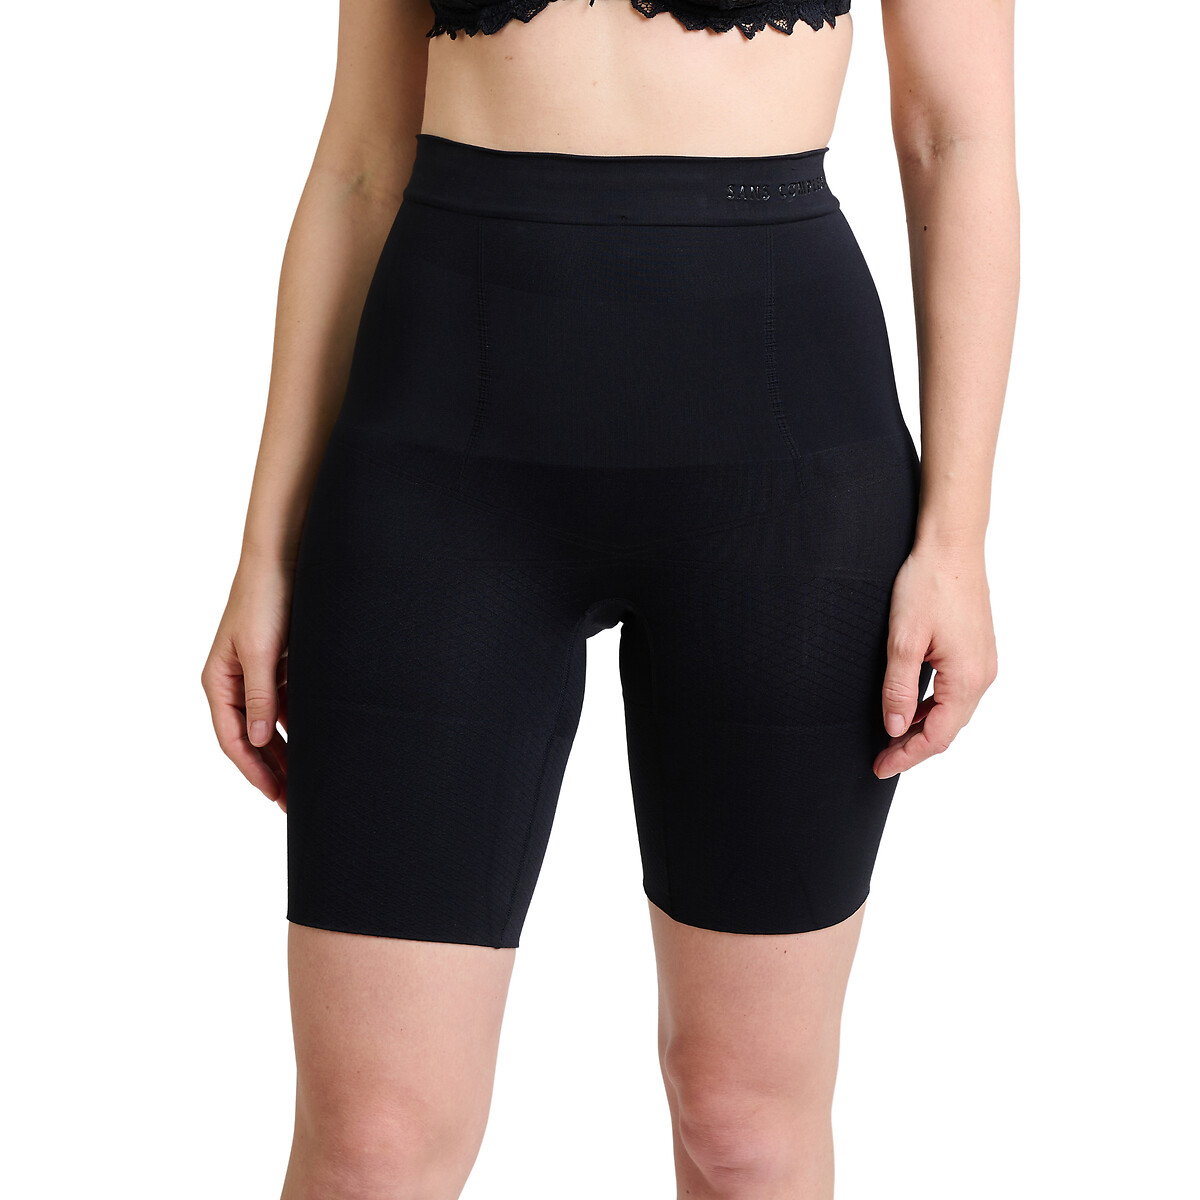 Slimmers Control Shorts with High Waist